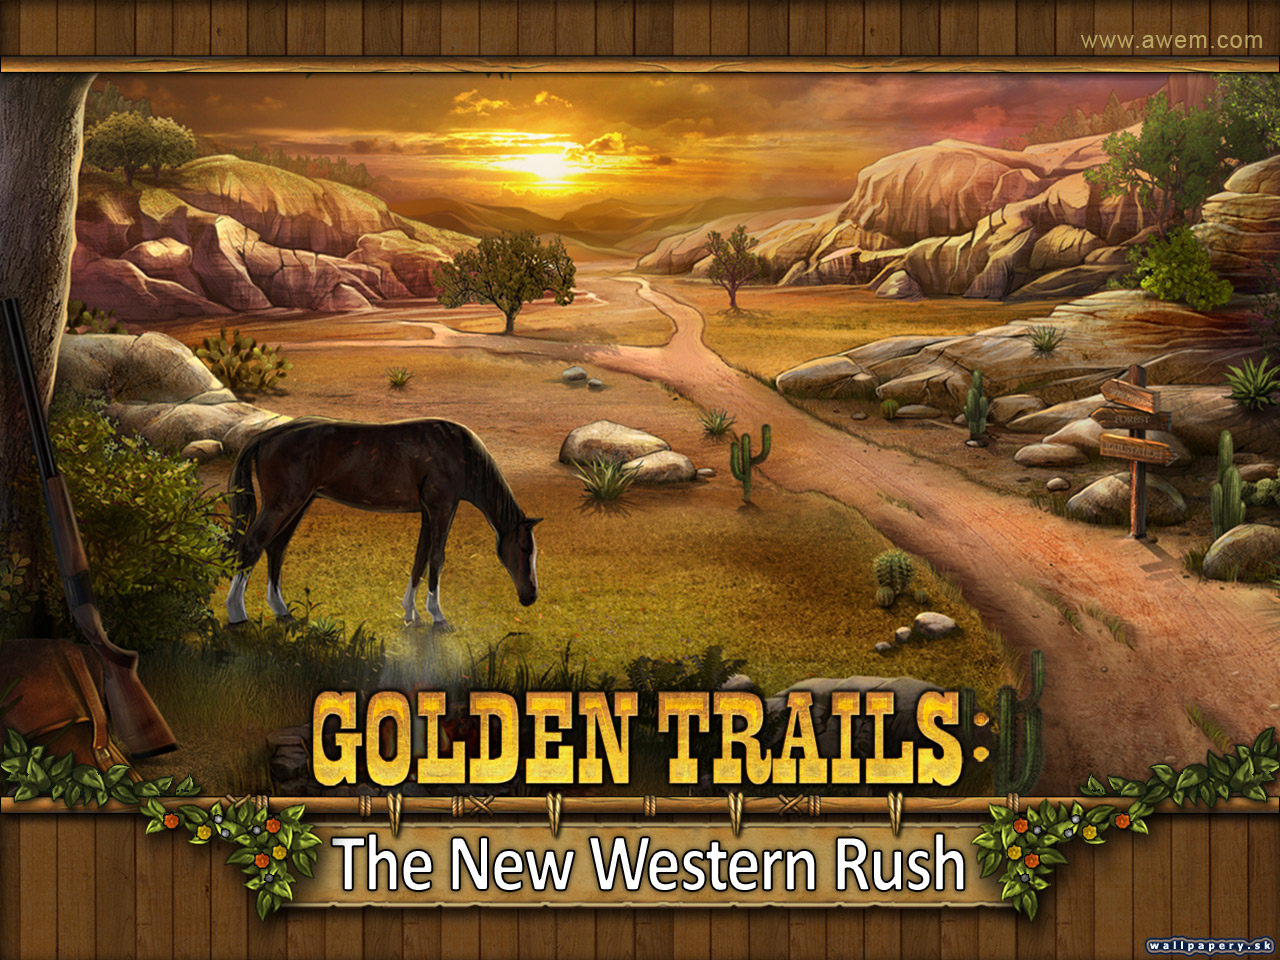 Golden Trails: The New Western Rush - wallpaper 3